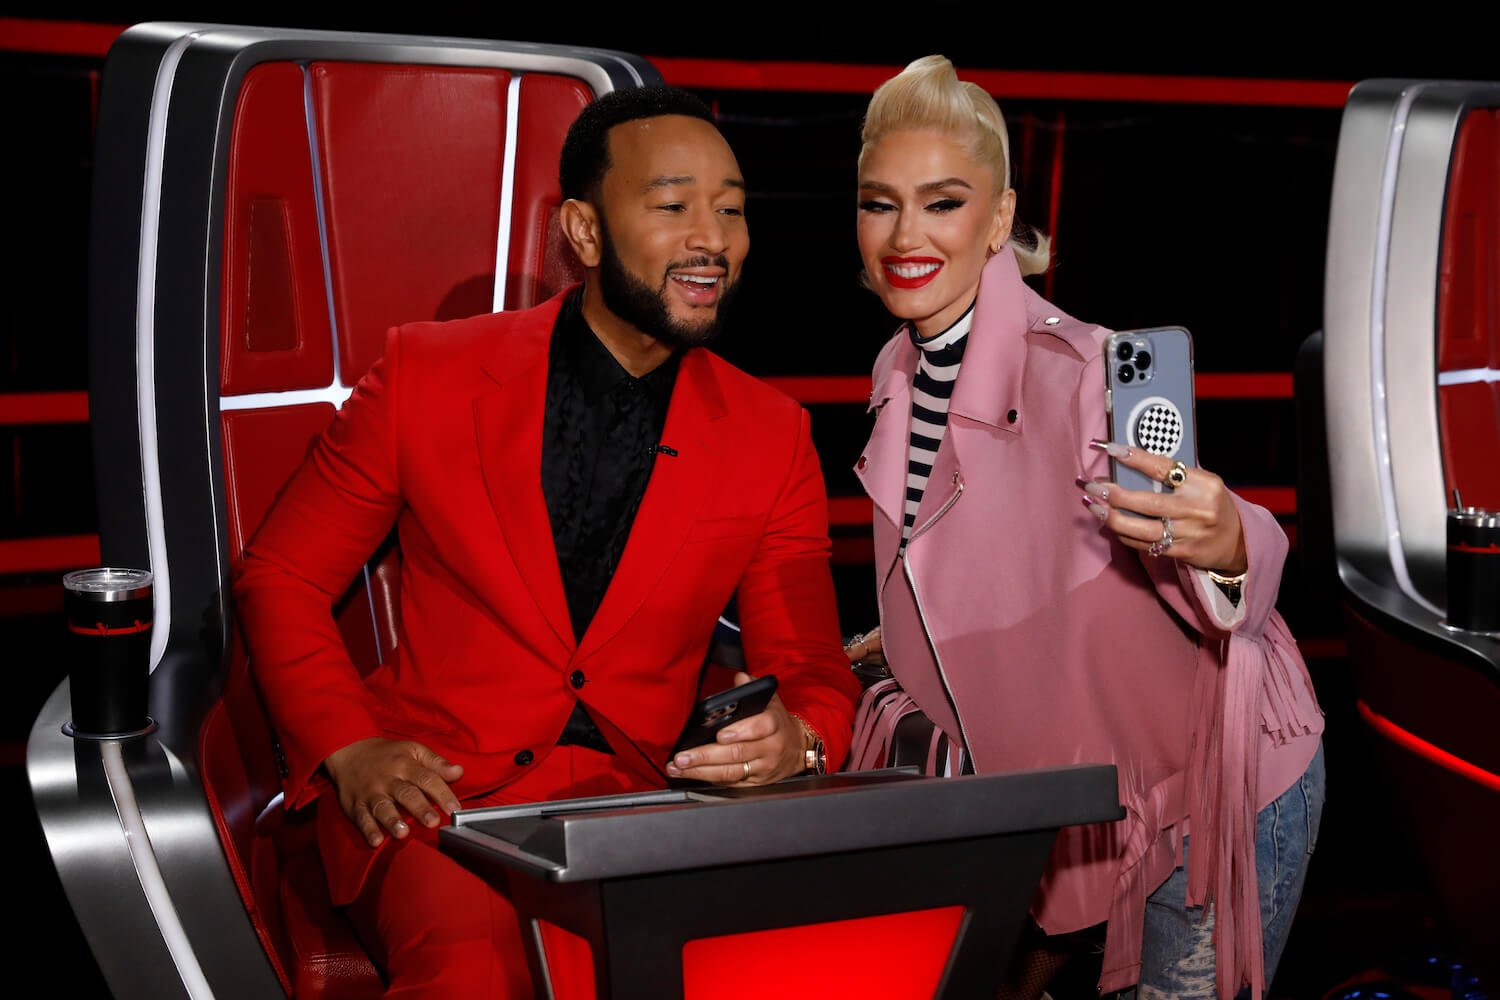 'The Voice' Season 24 coaches John Legend and Gwen Stefani smiling next to each other while Stefani holds her phone for a selfie